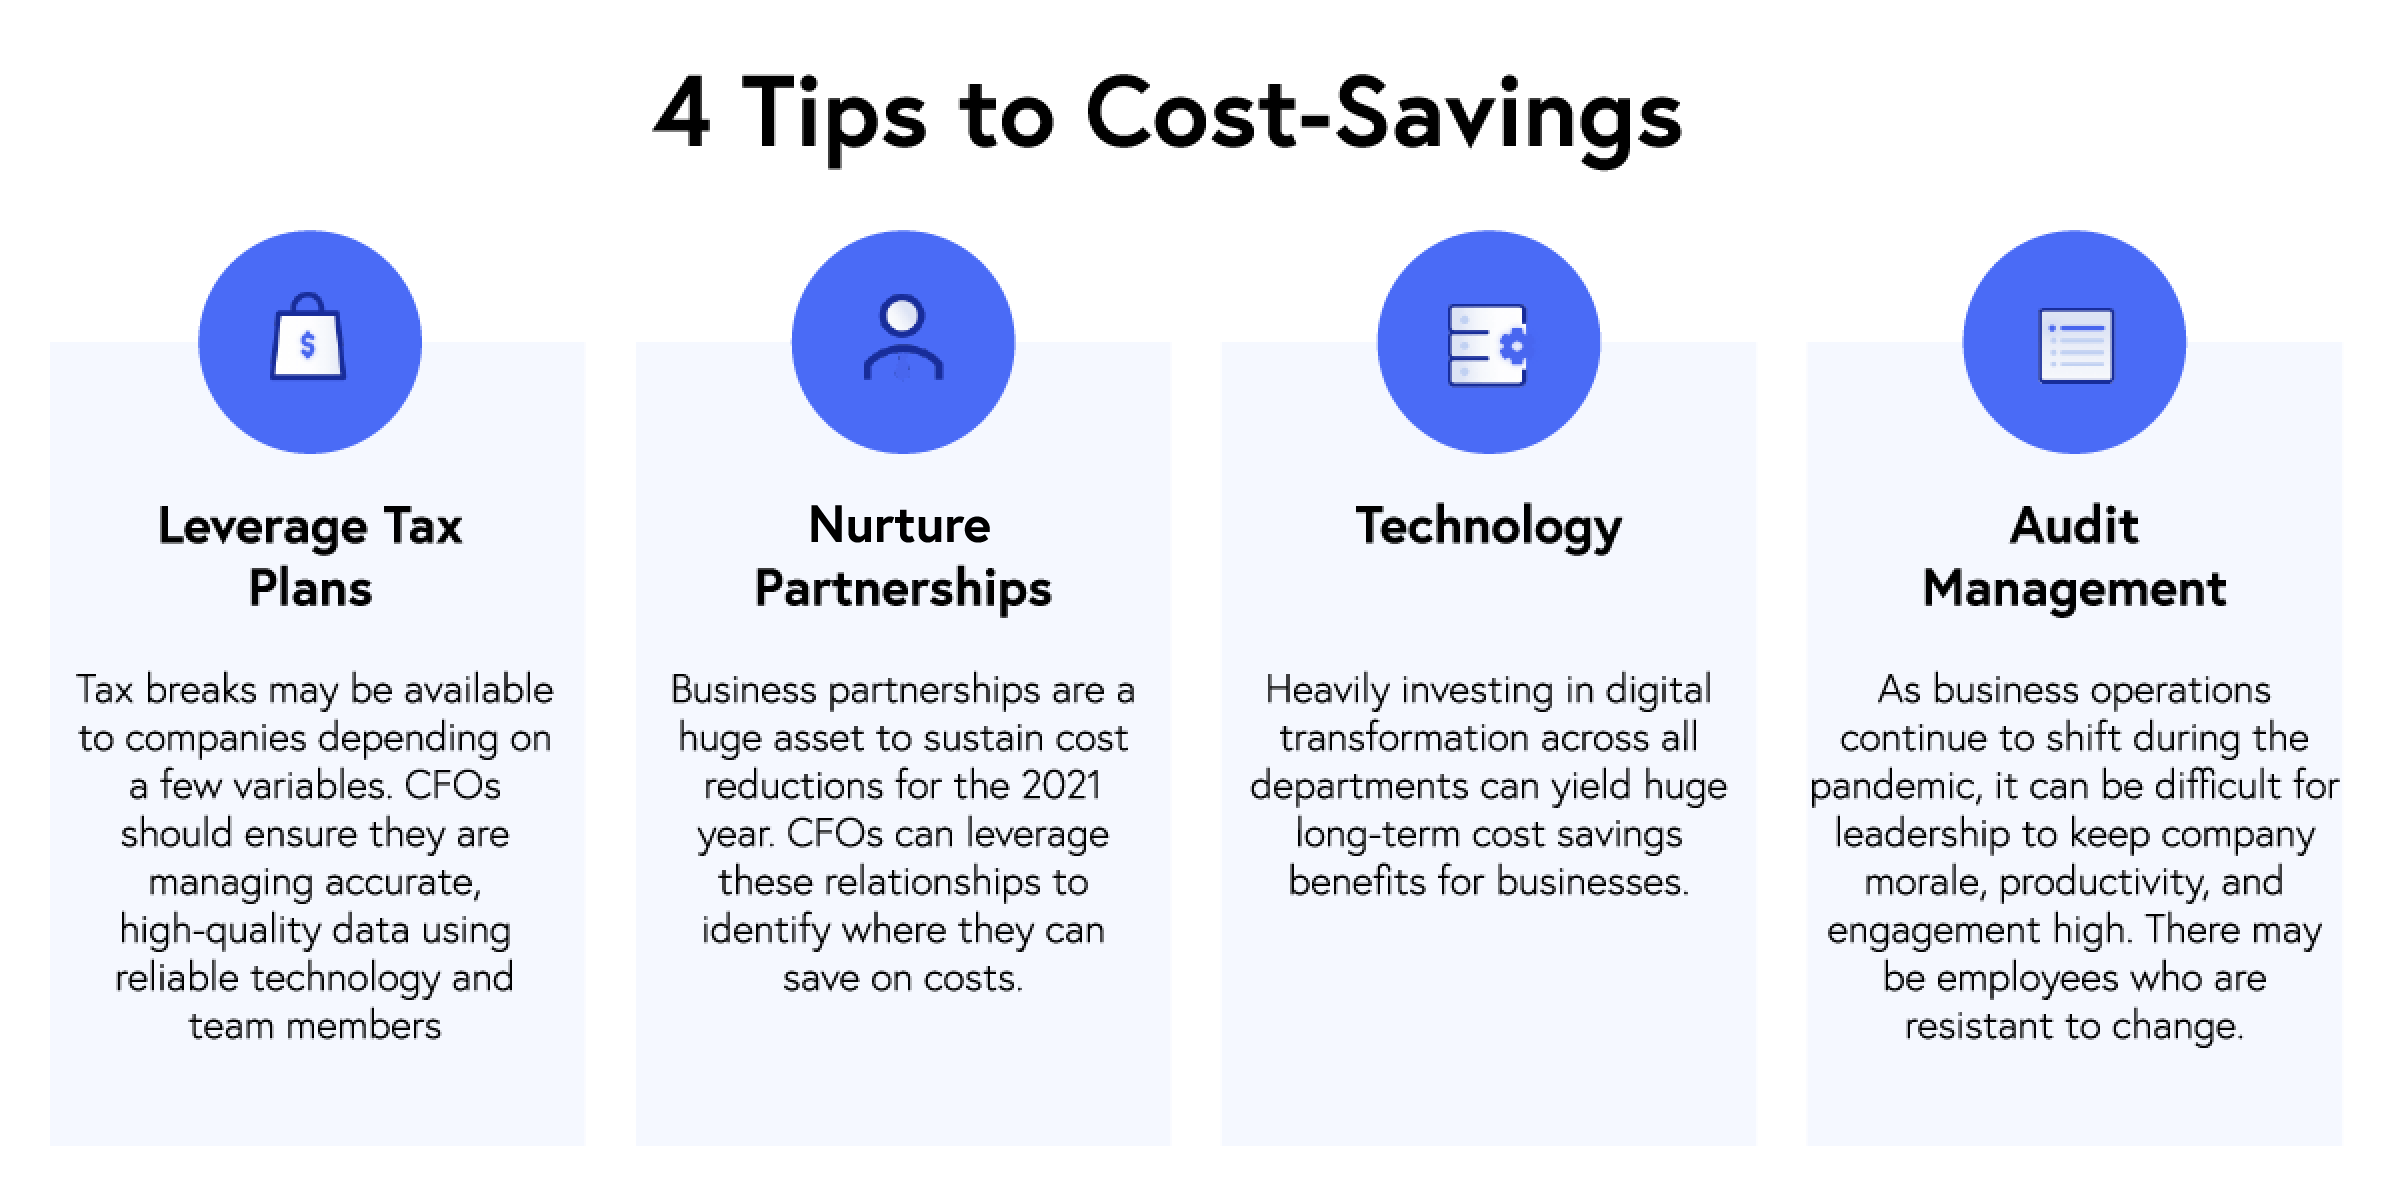 4 Tips to Cost-Savings: Leverage tax plans, Nurture Partnerships, Technology, Audit management=